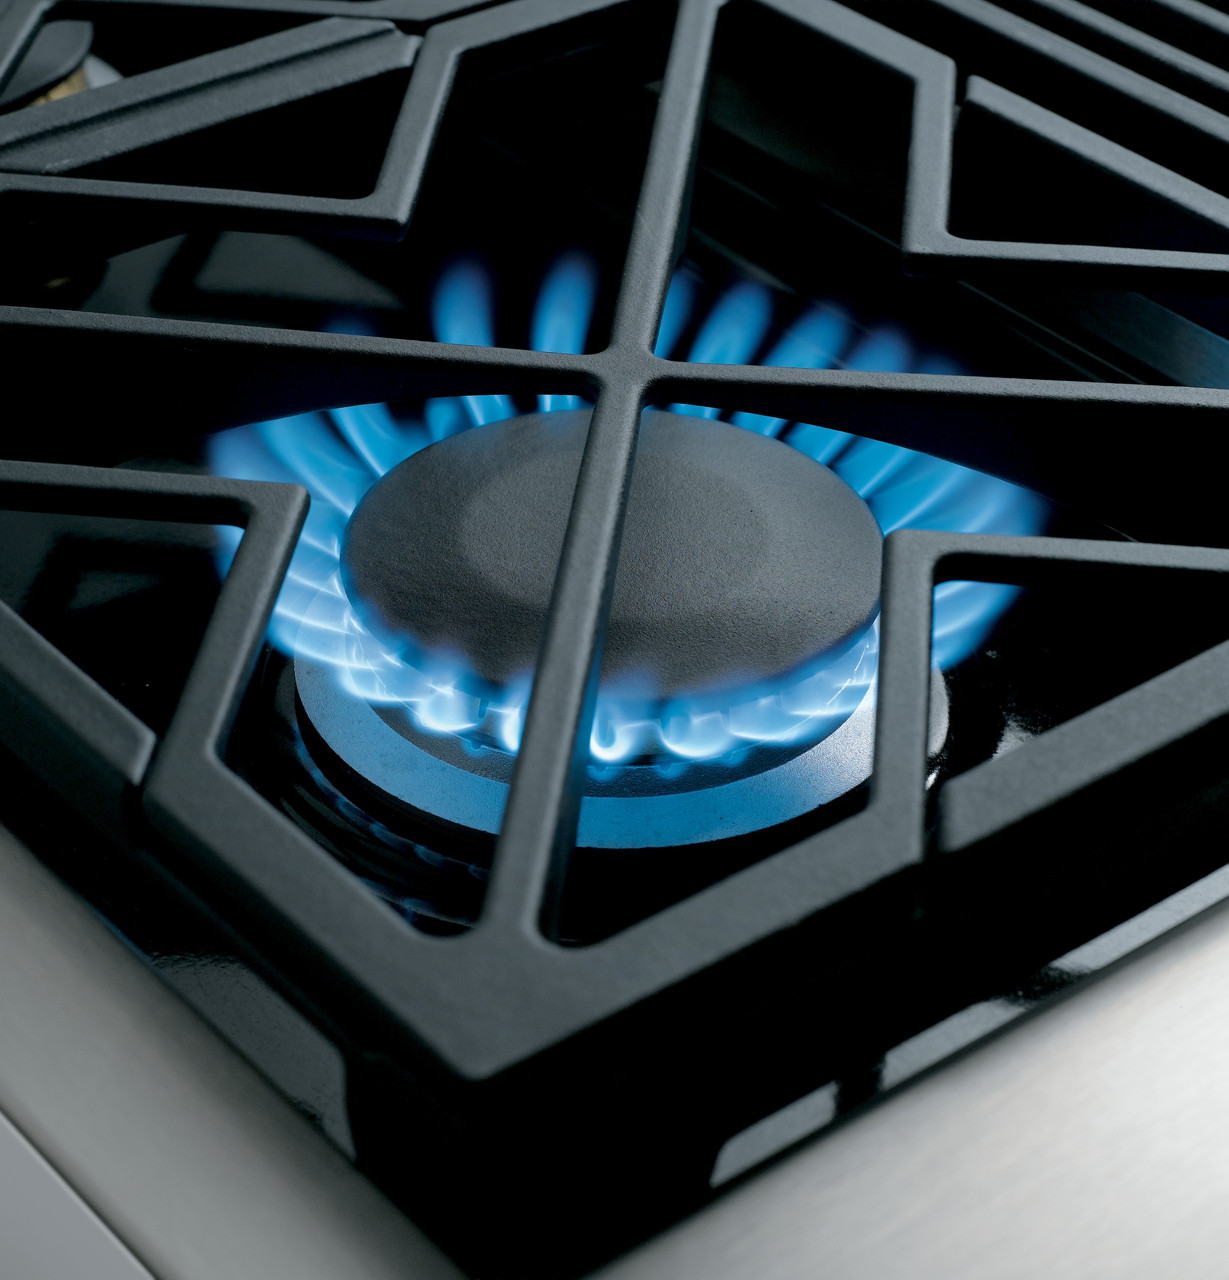 Café™ 48 Commercial-Style Gas Rangetop with 6 Burners and Integrated  Griddle (Natural Gas) - CGU486P3TD1 - Cafe Appliances